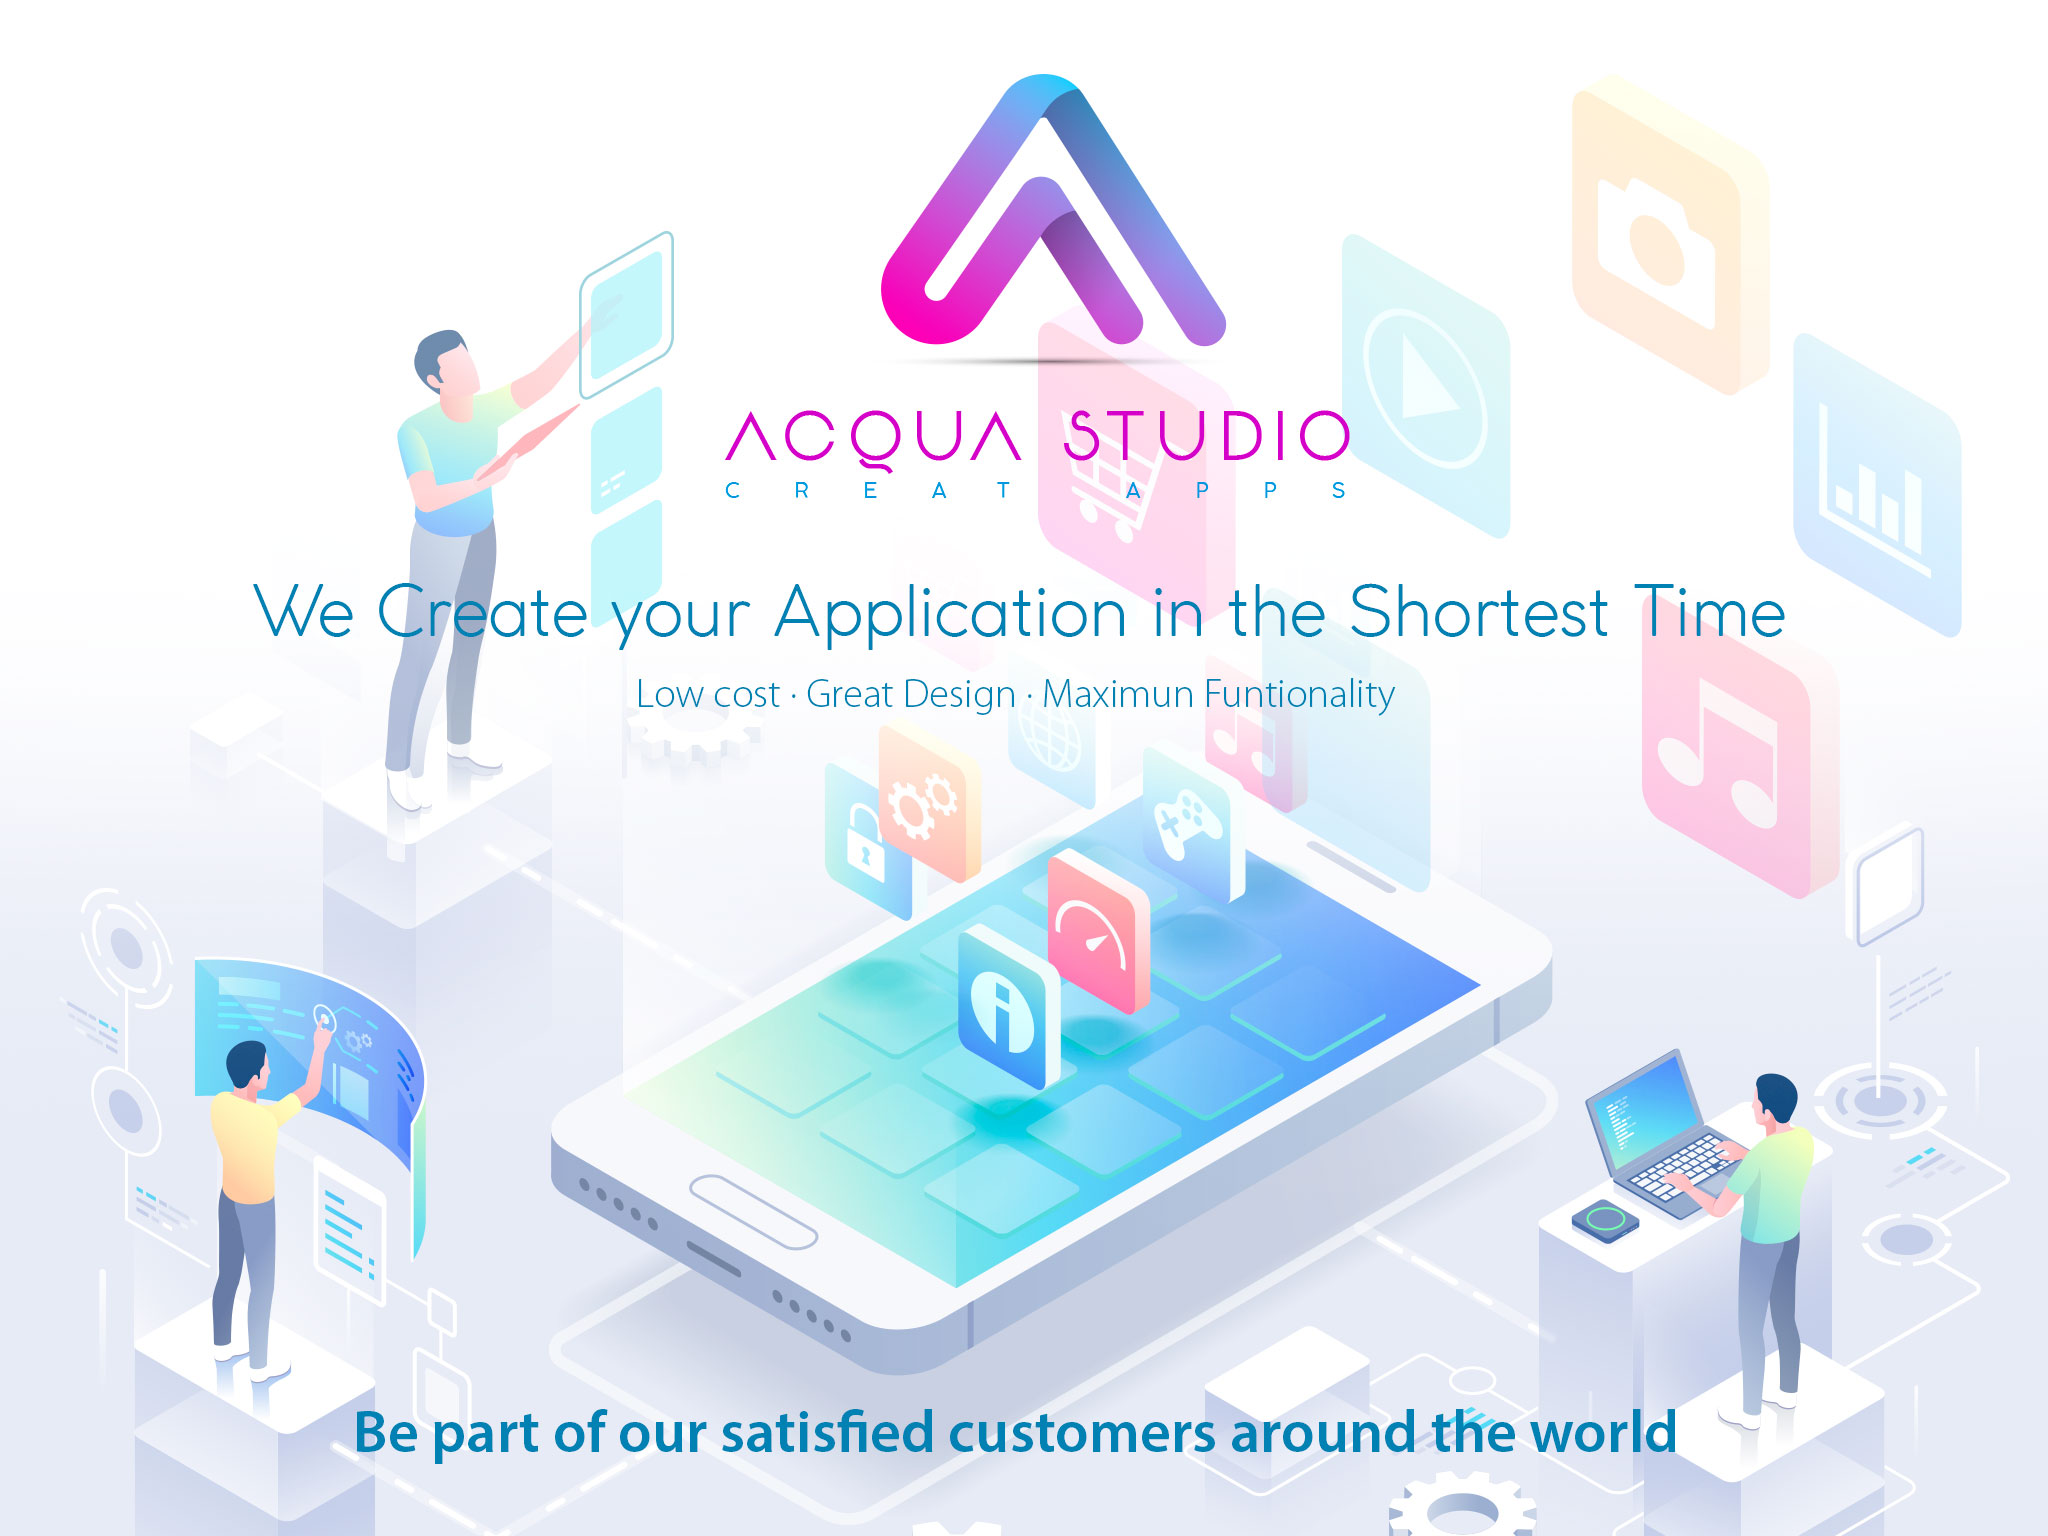 We create your application